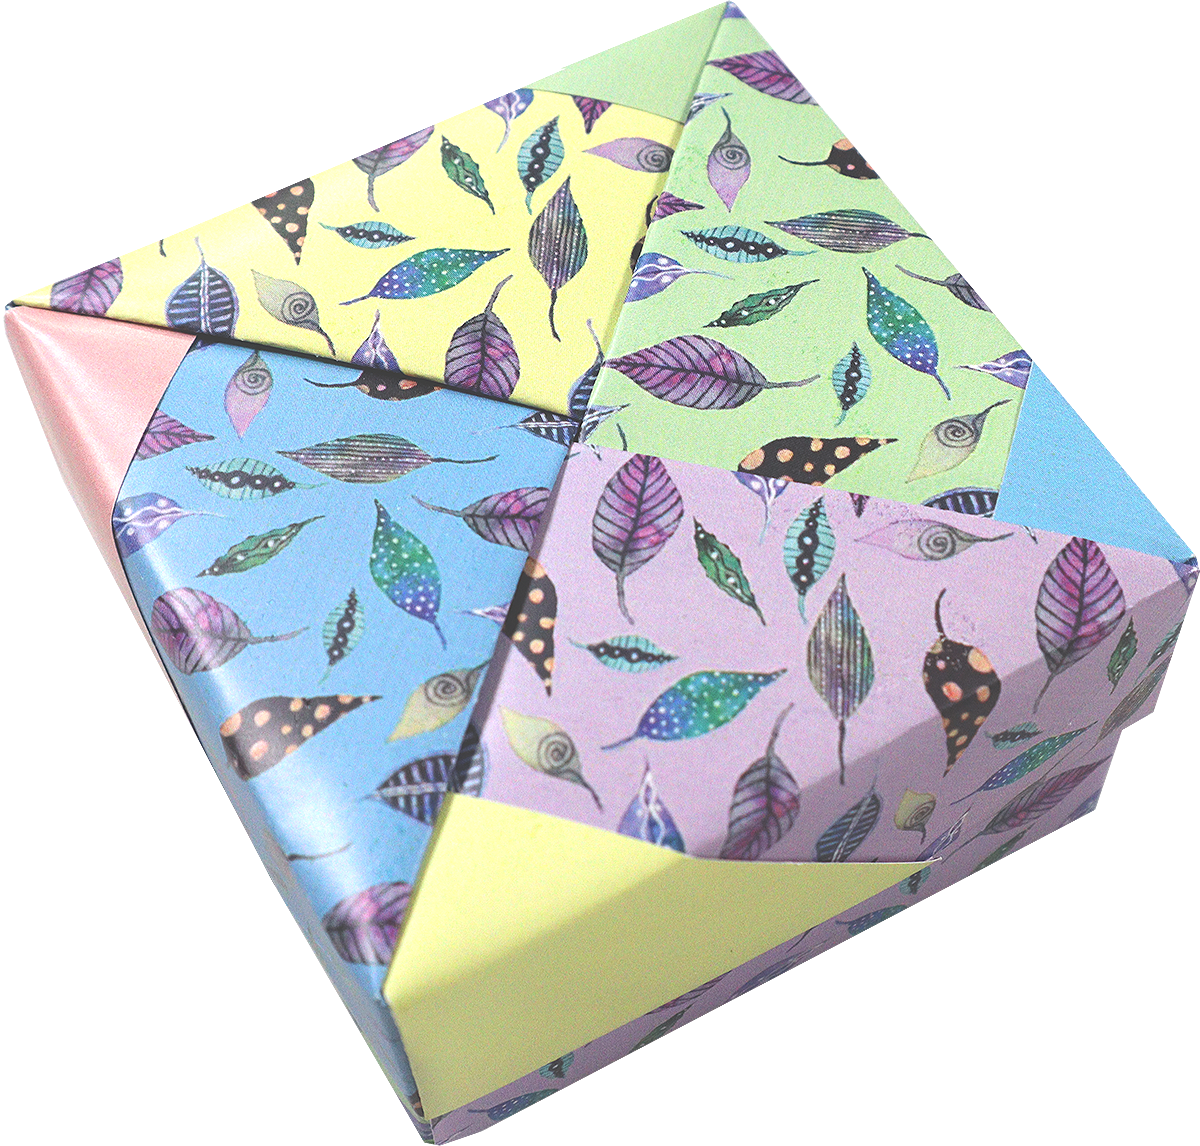 Better Fortune Origami Paper, 5 Japanese Colors 6 20 Sheets – Paper Jade